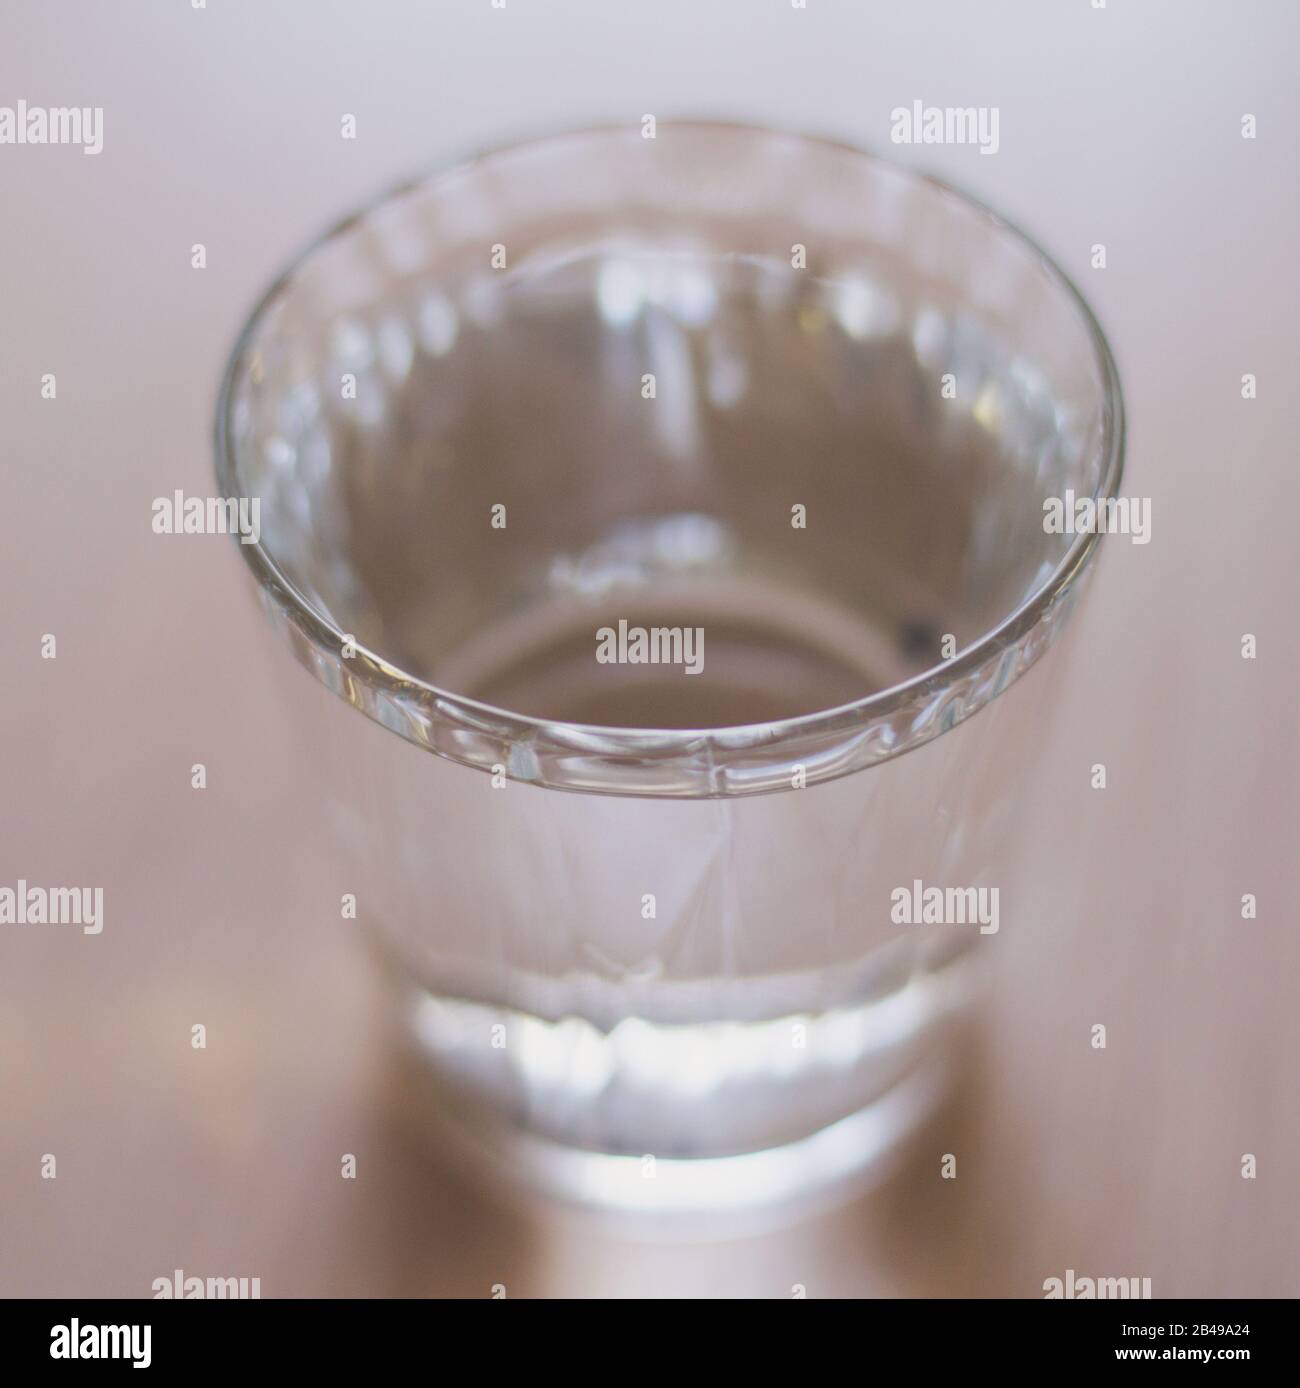 Full glass of water on the light wooden table Stock Photo